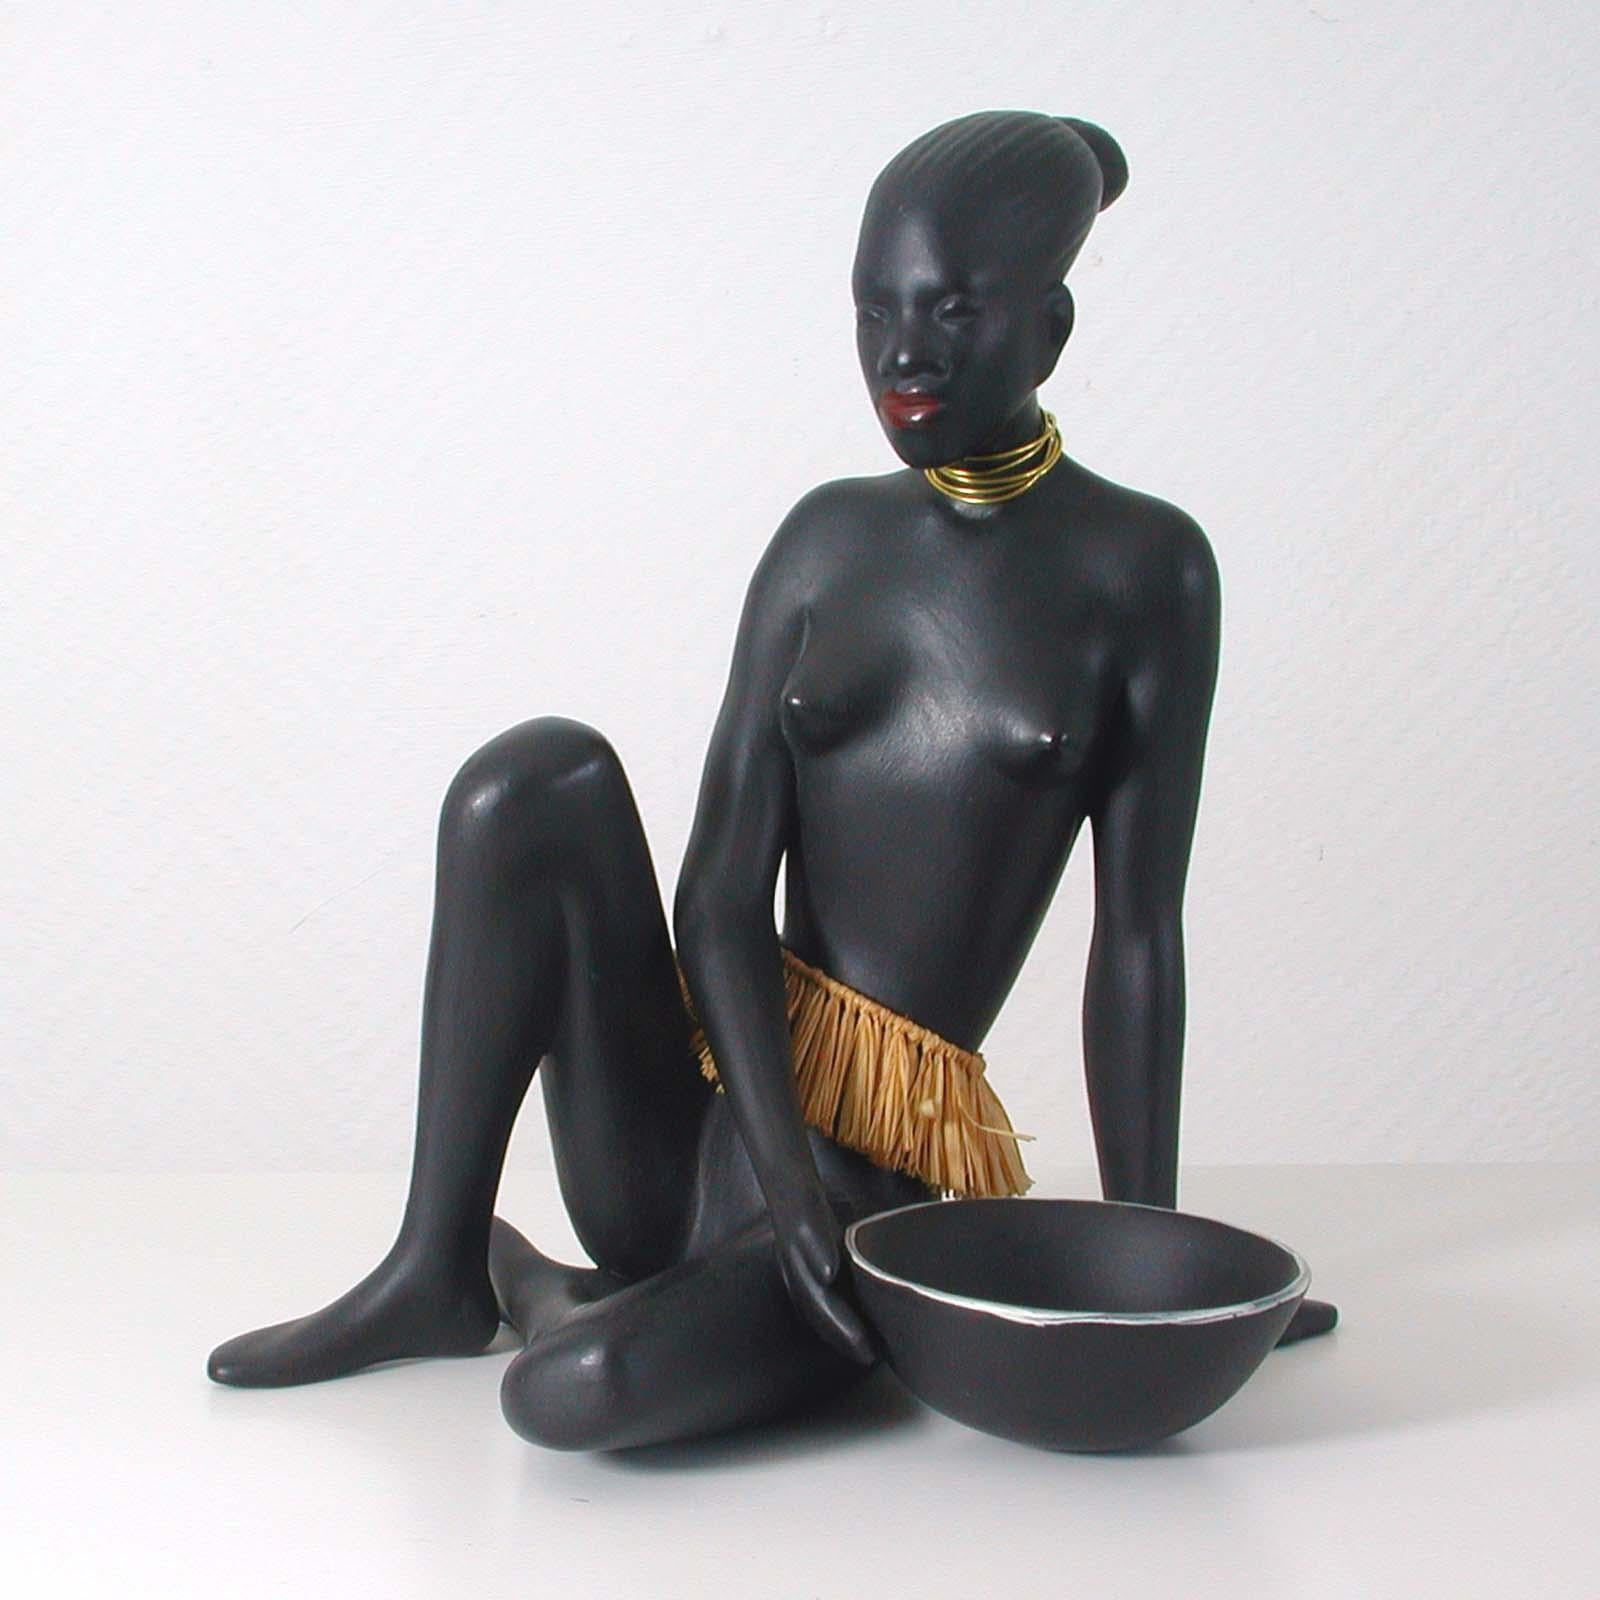 This beautiful sculpture was designed and manufactured in Germany in the 1950s by Porzellanfabrik Cortendorf Julius Griesbach in Coburg. Designer was Albert Strunz. Model no. 2512.

It features a nude African native woman with raffia skirt,